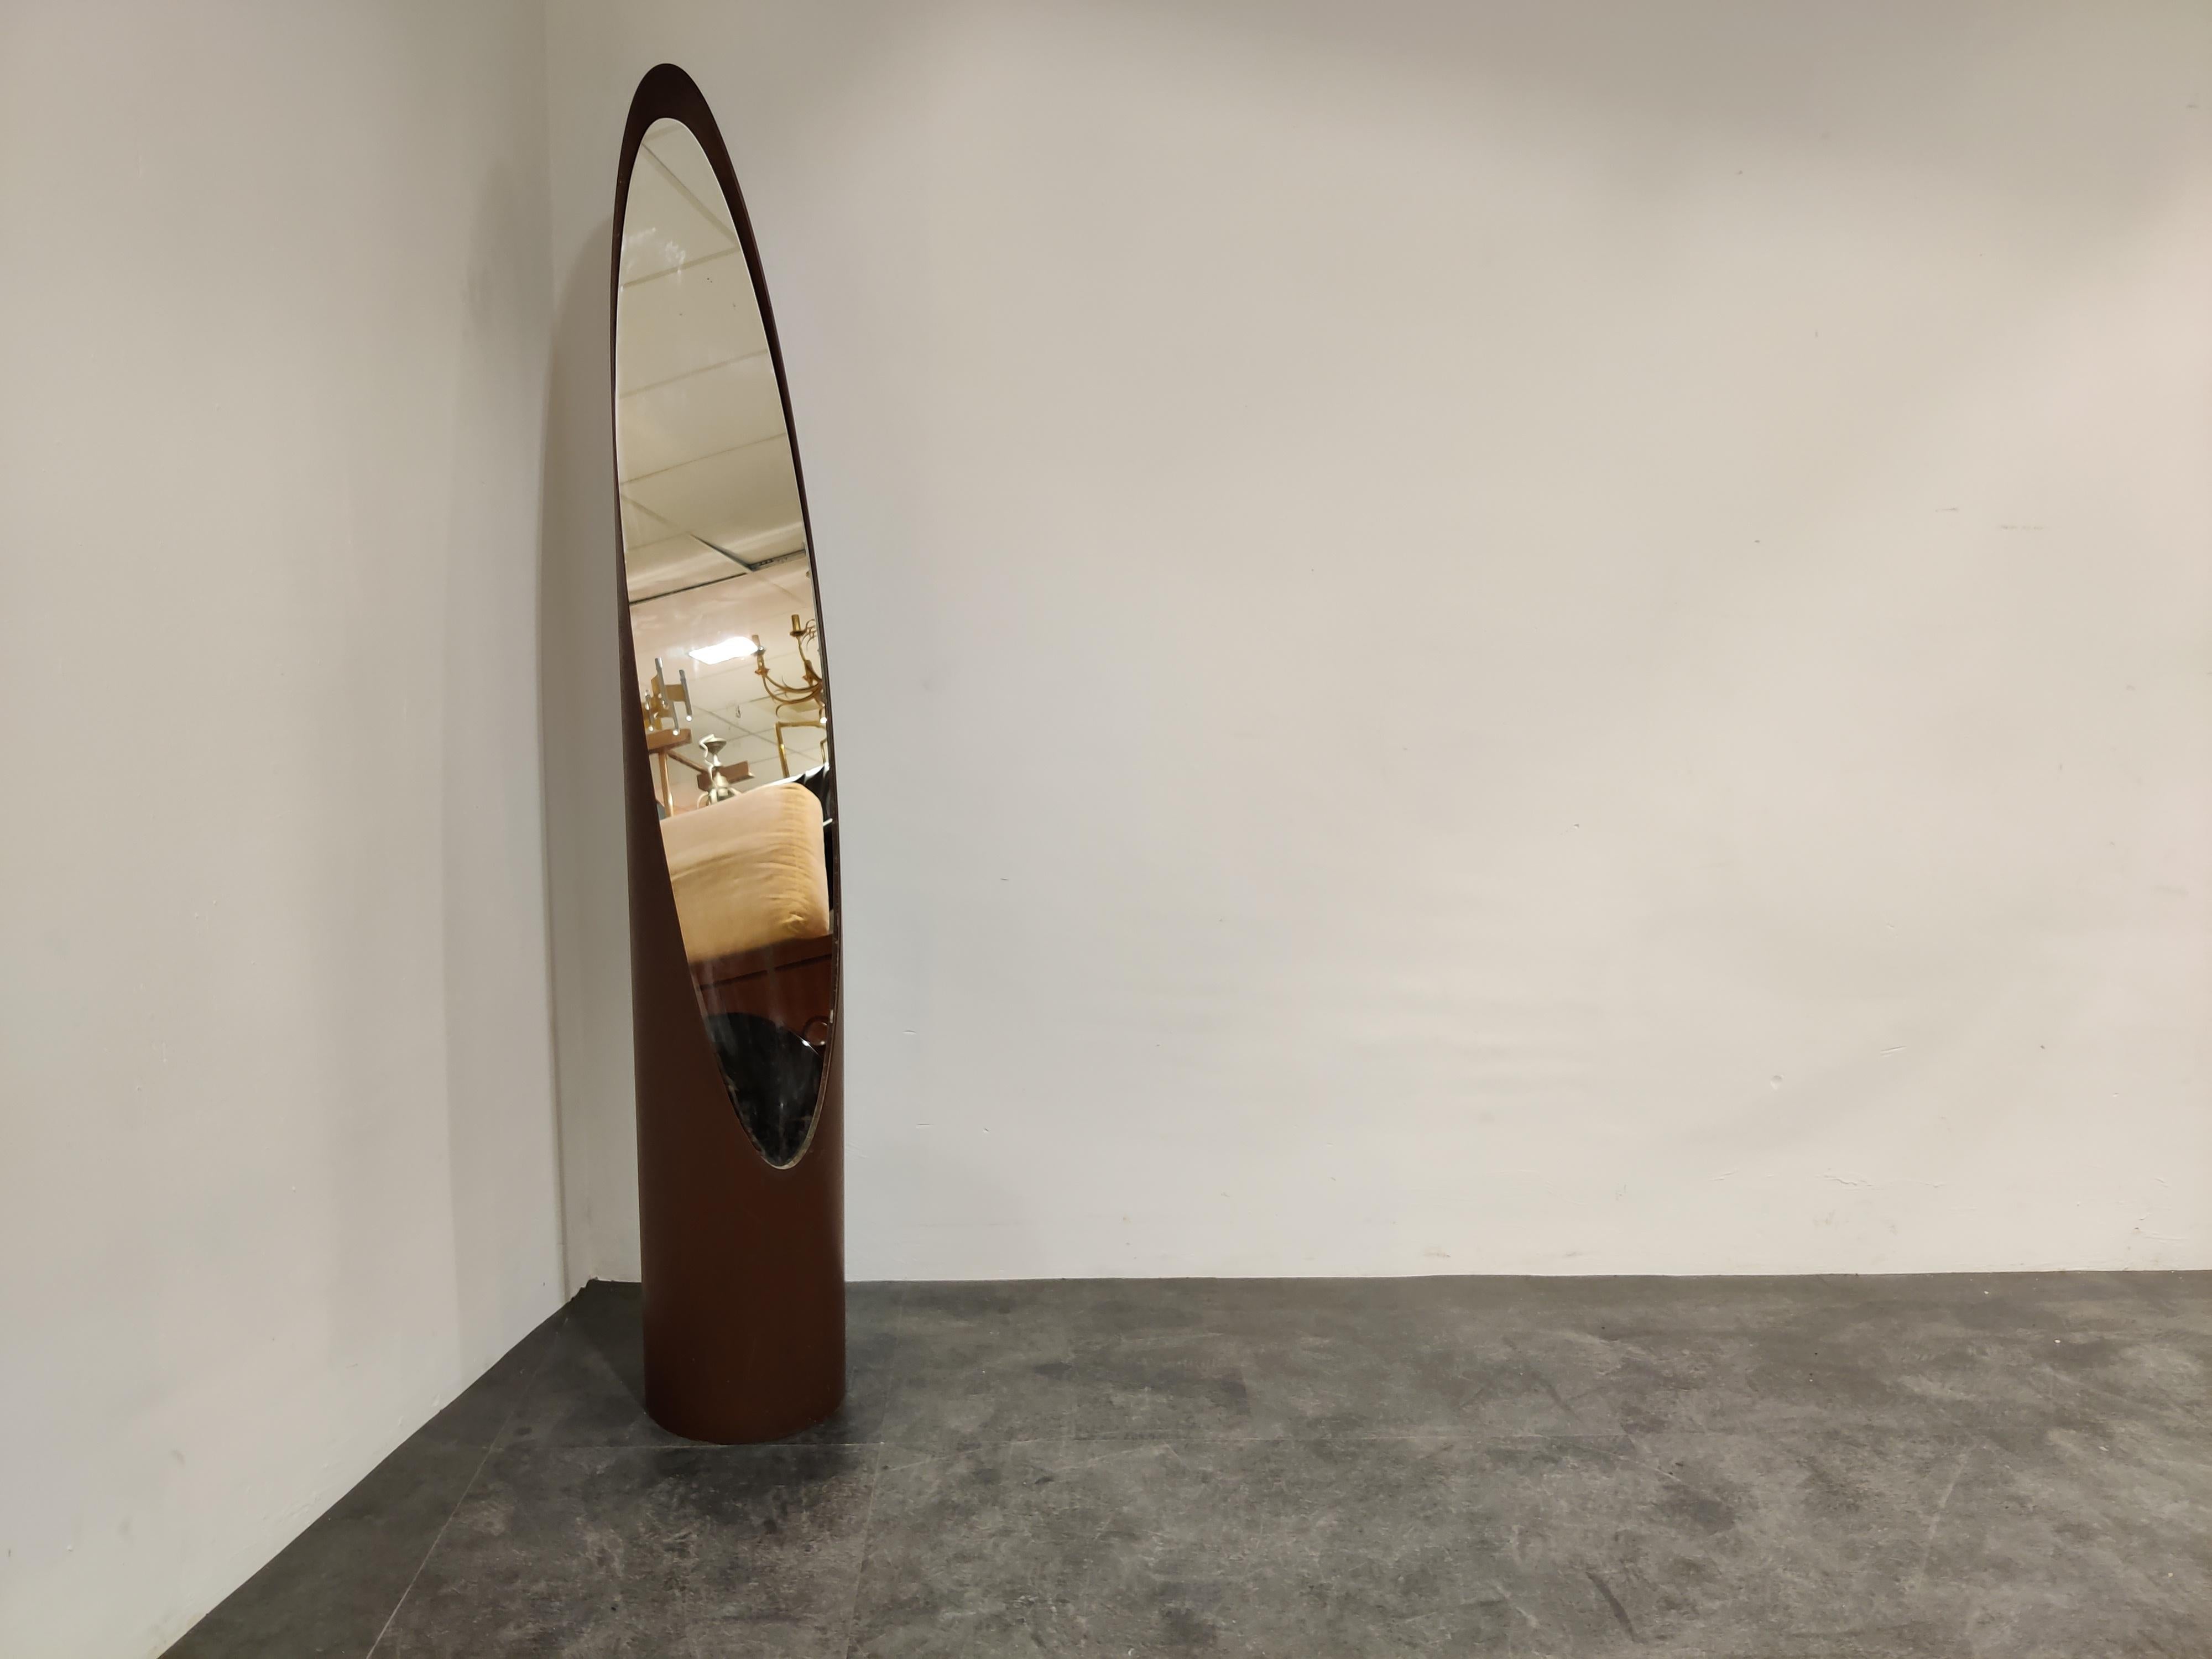 Brown 'Lipstick' floor mirror designed by Rodolfo Bonetto.

Good condition with some patina on the mirror. 

Great timeless design,

1970s, France

Dimensions:
Height 164cm/64.56